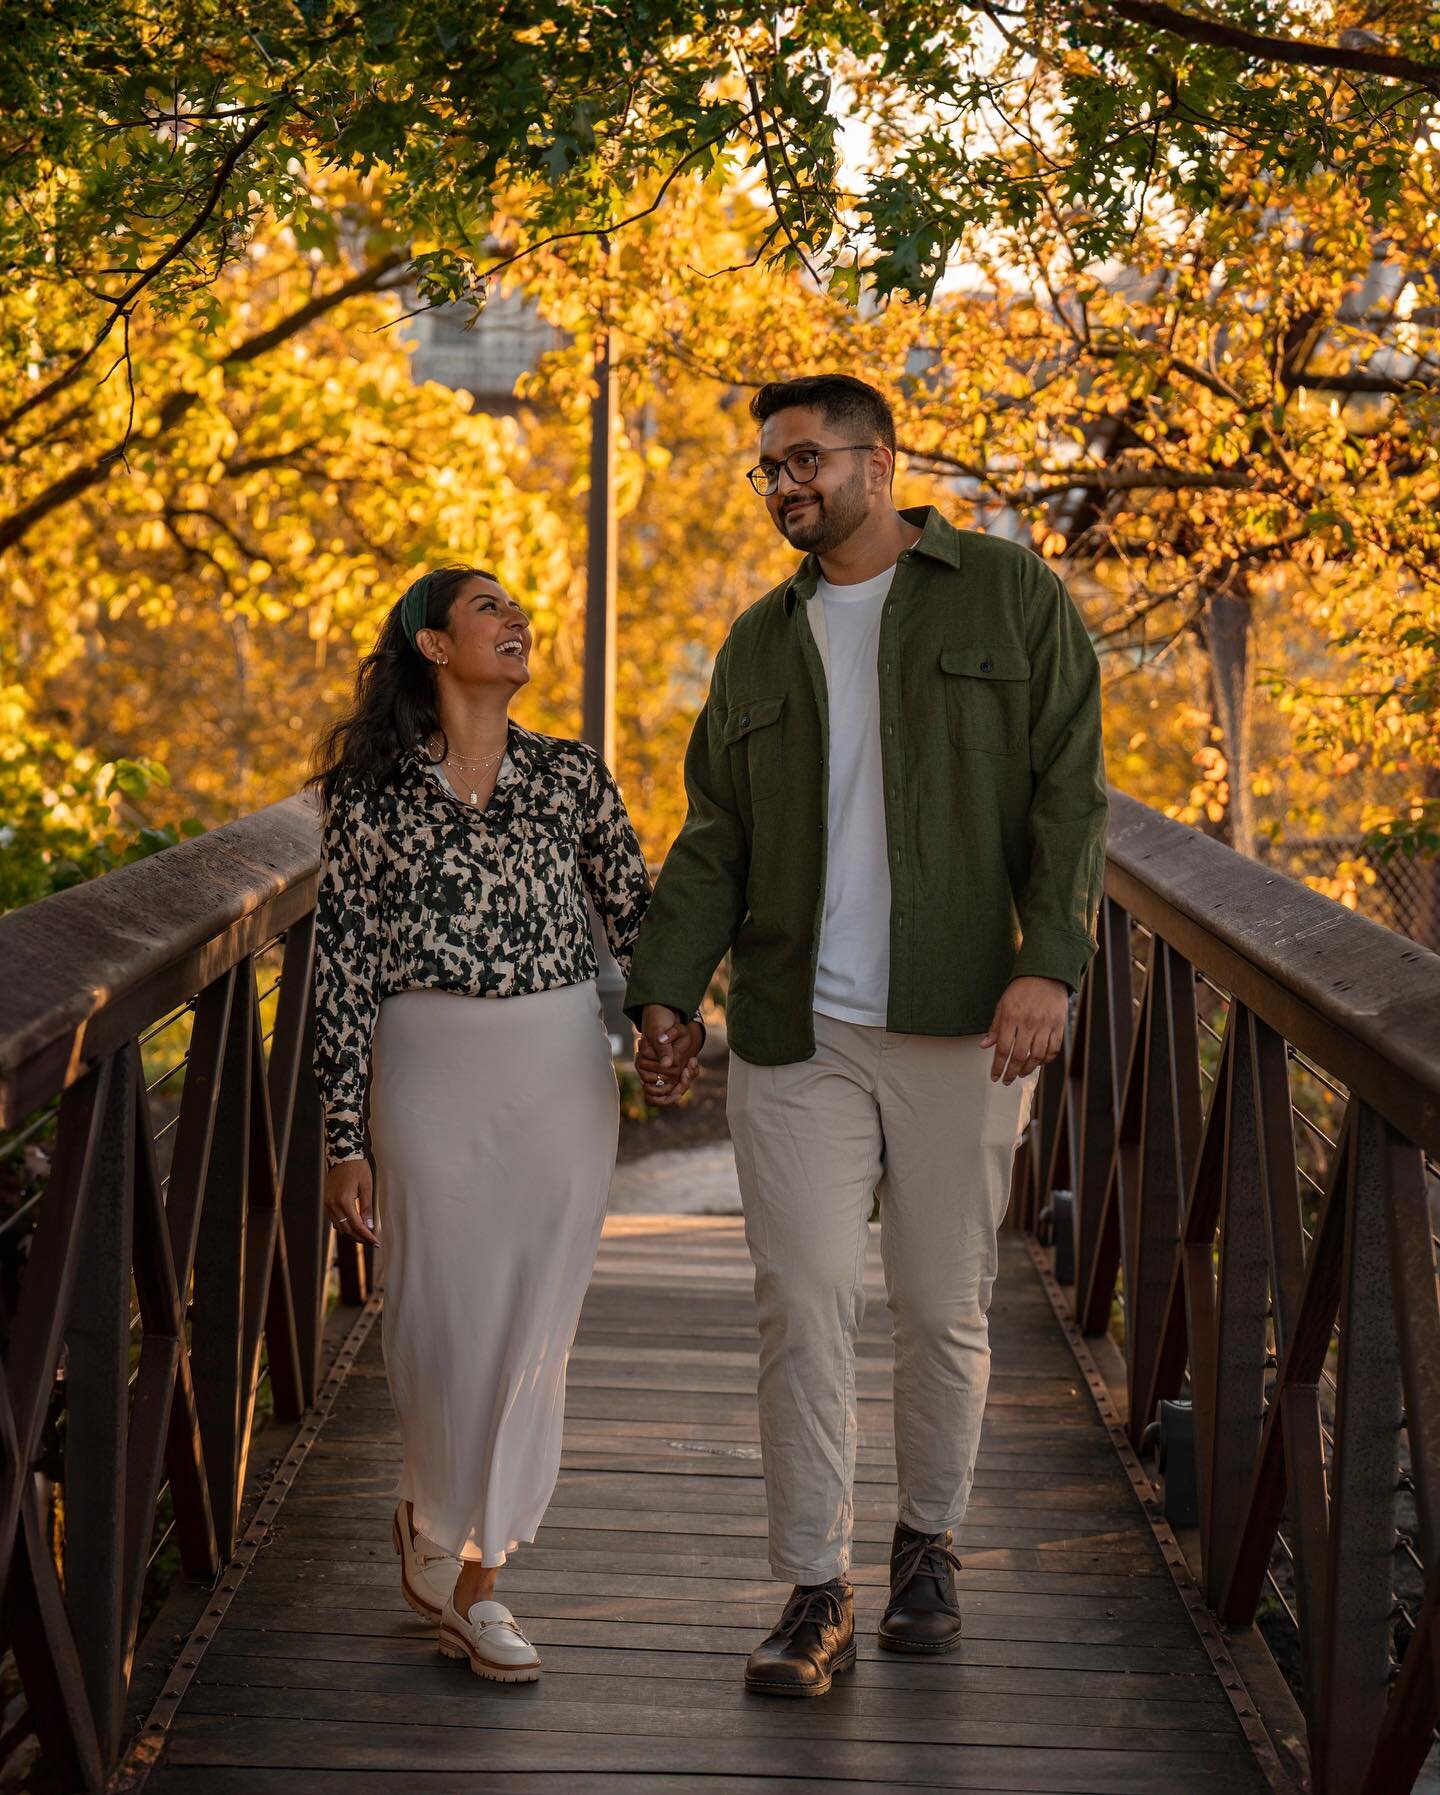 From one of my most recent shoots in Philly 📸📸
.
.
.
.
#portraitphotography #autumnlight #couplesshoot #💍❤️